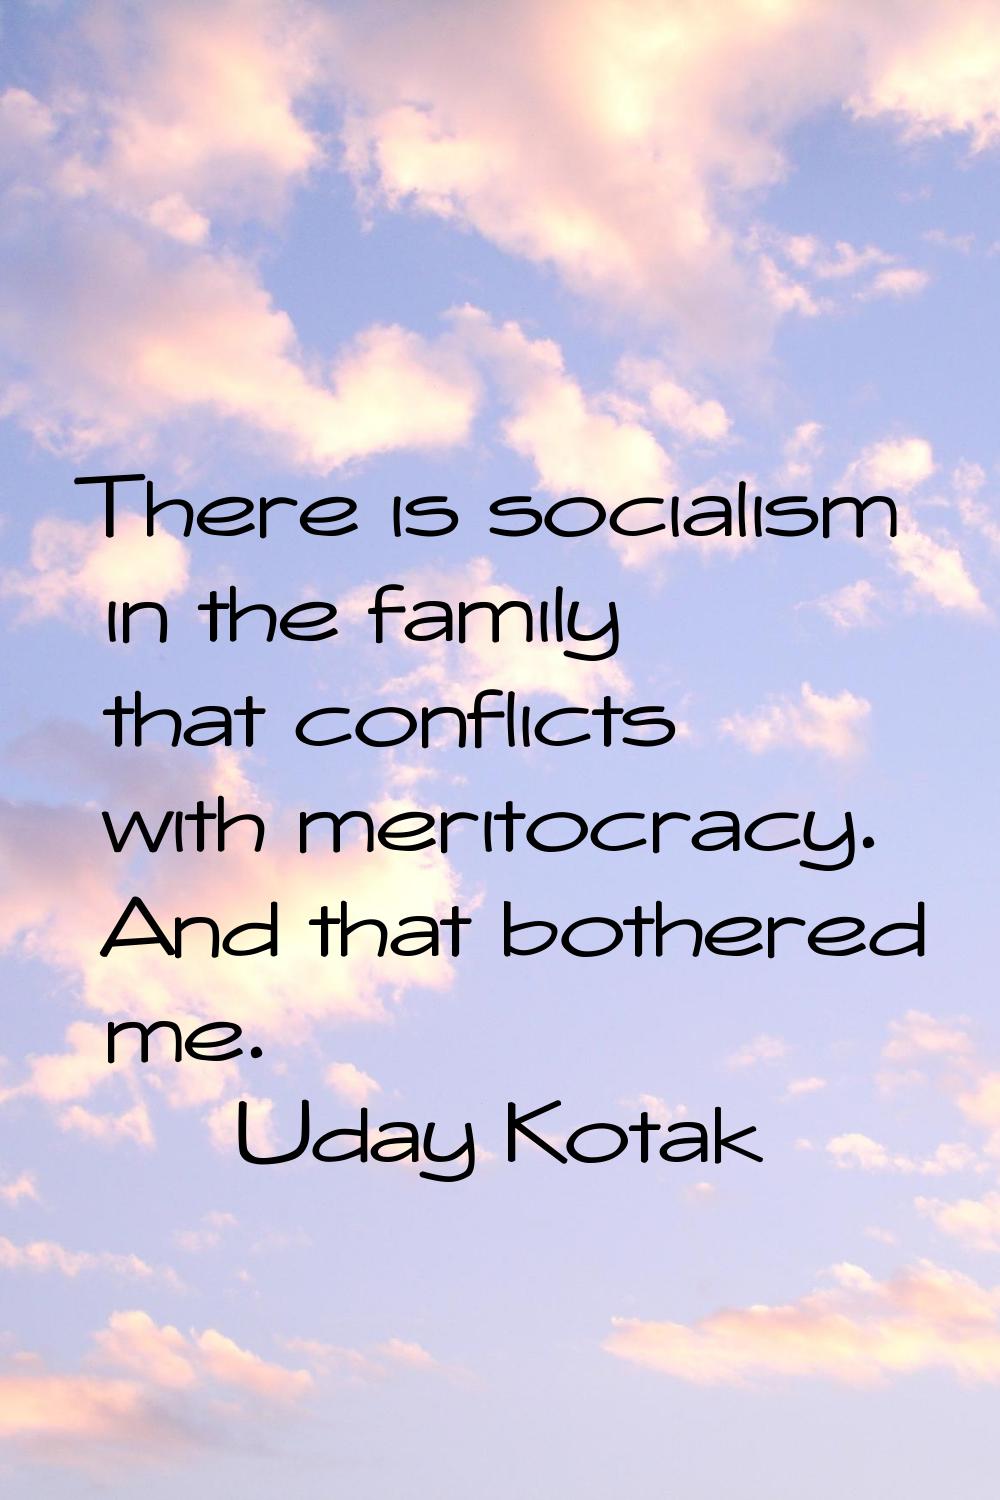 There is socialism in the family that conflicts with meritocracy. And that bothered me.